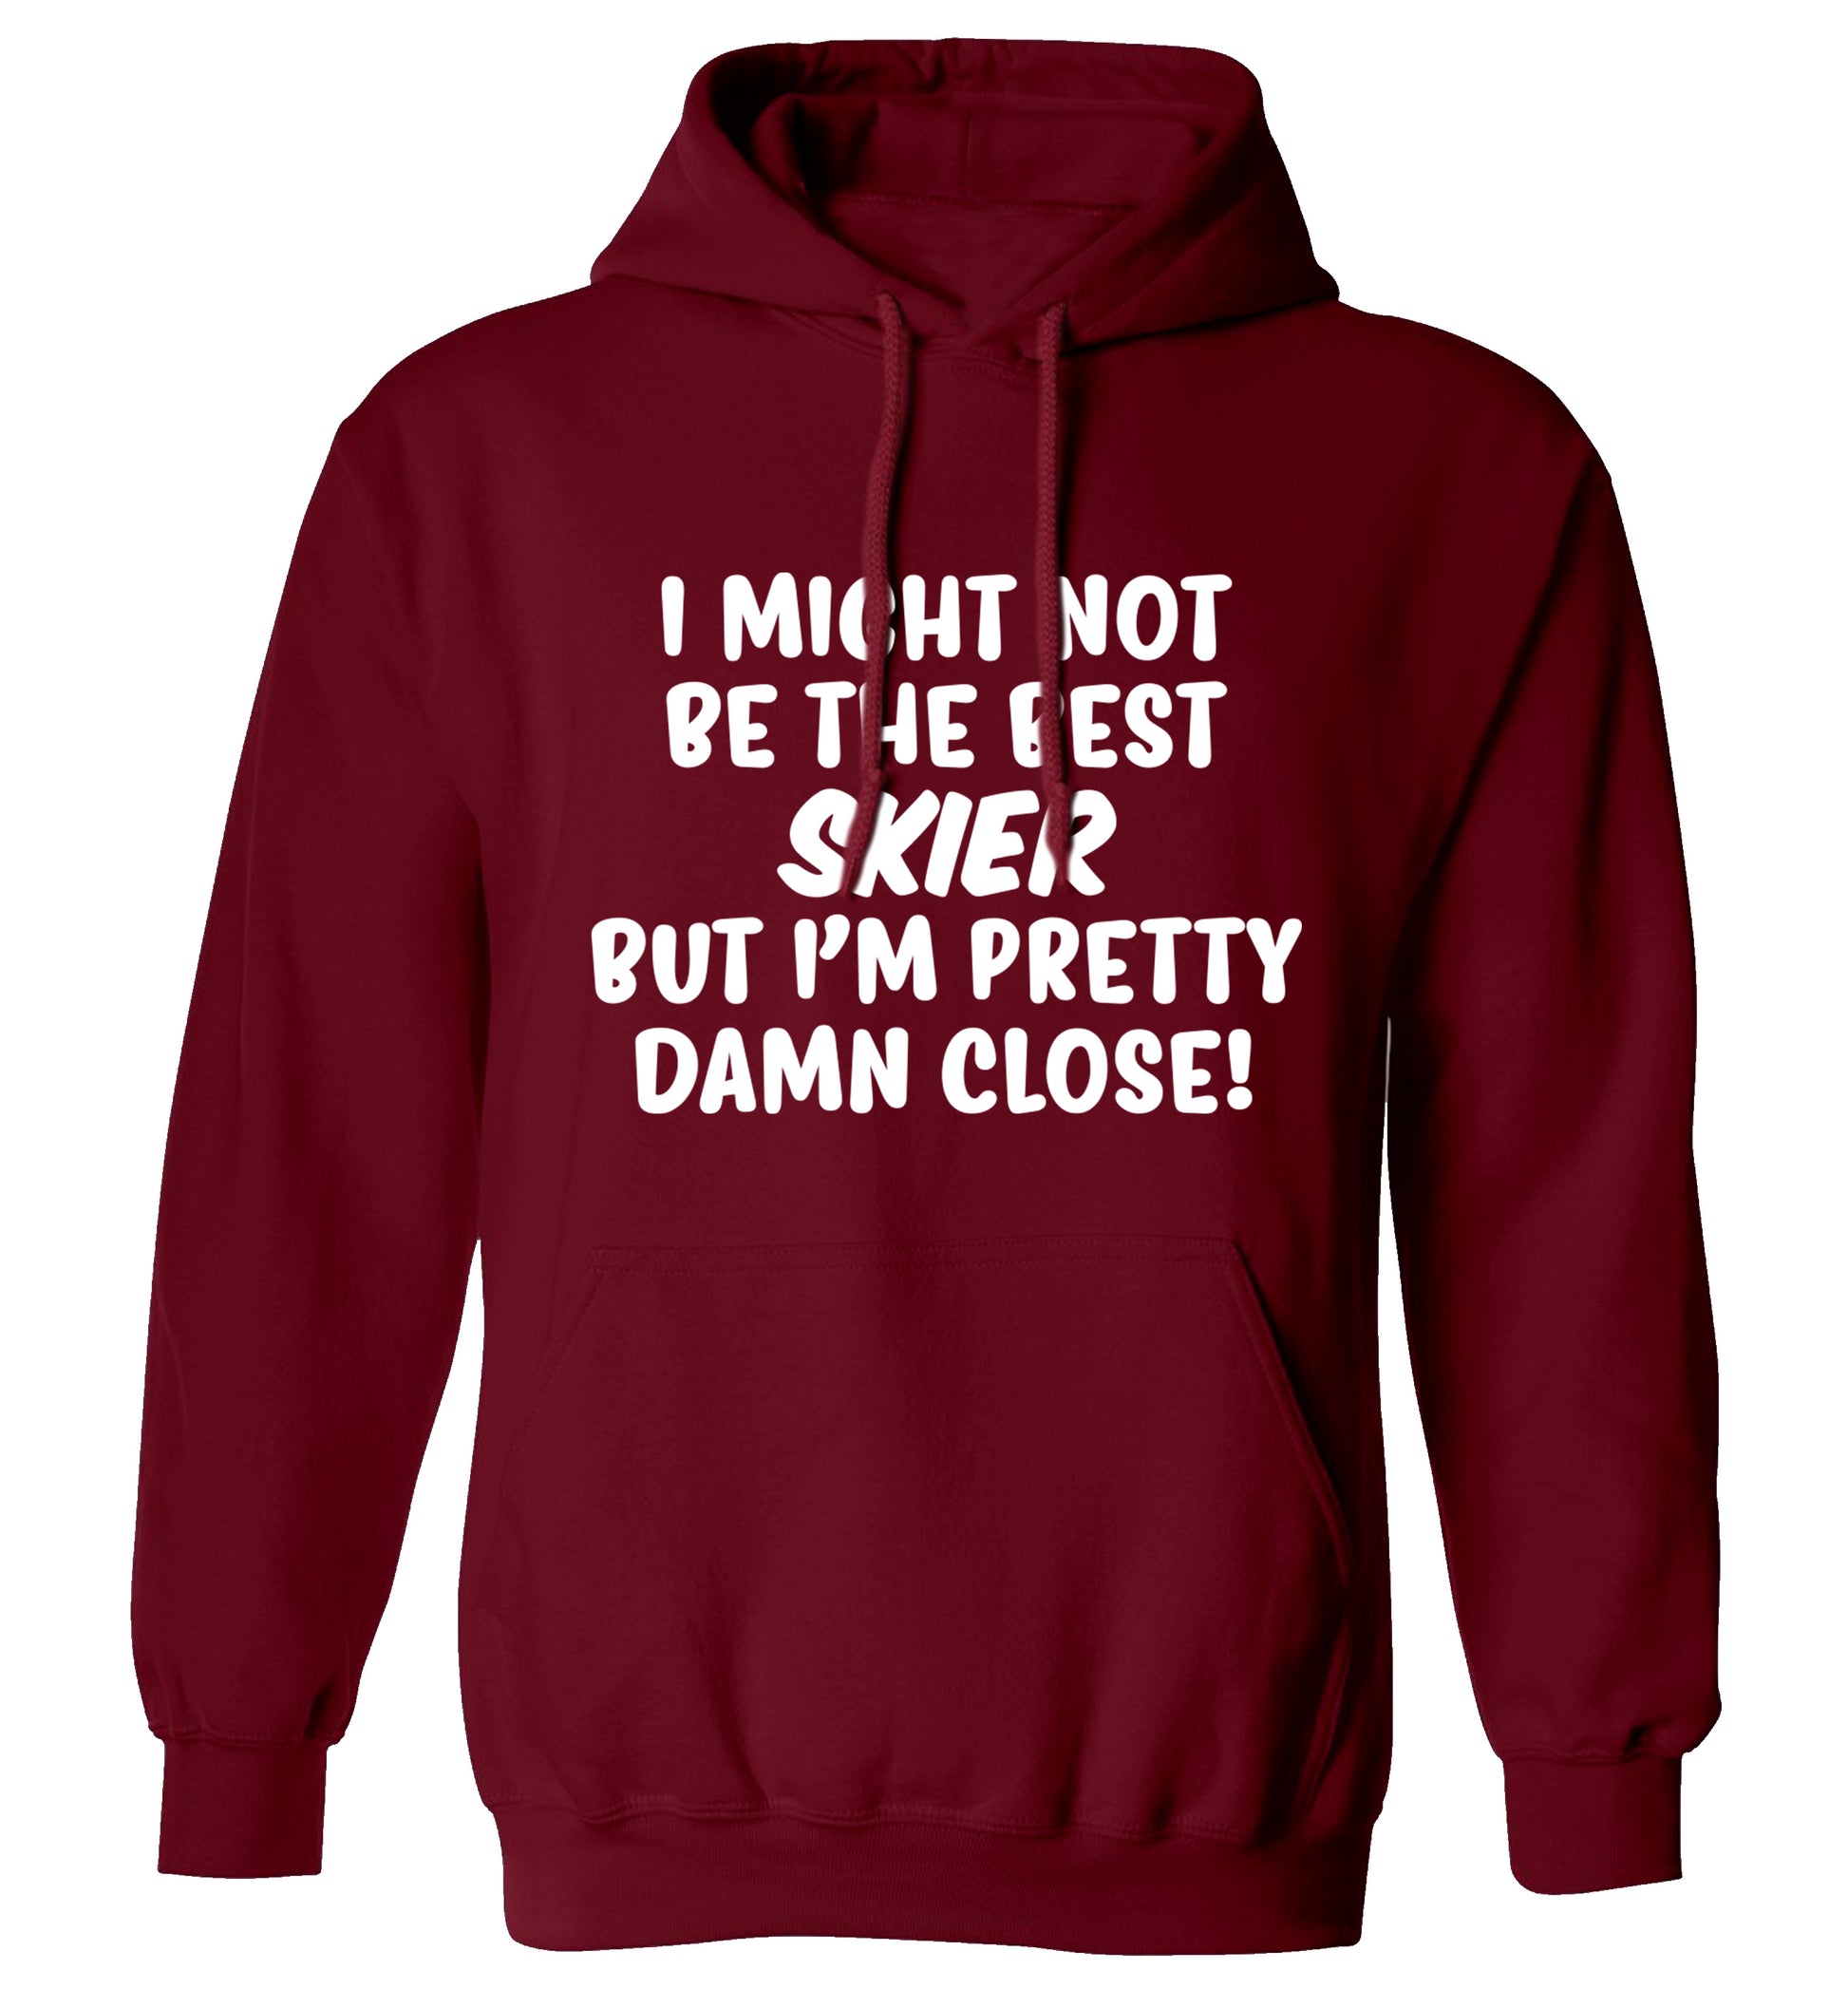 I might not be the best skier but I'm pretty damn close! adults unisexmaroon hoodie 2XL